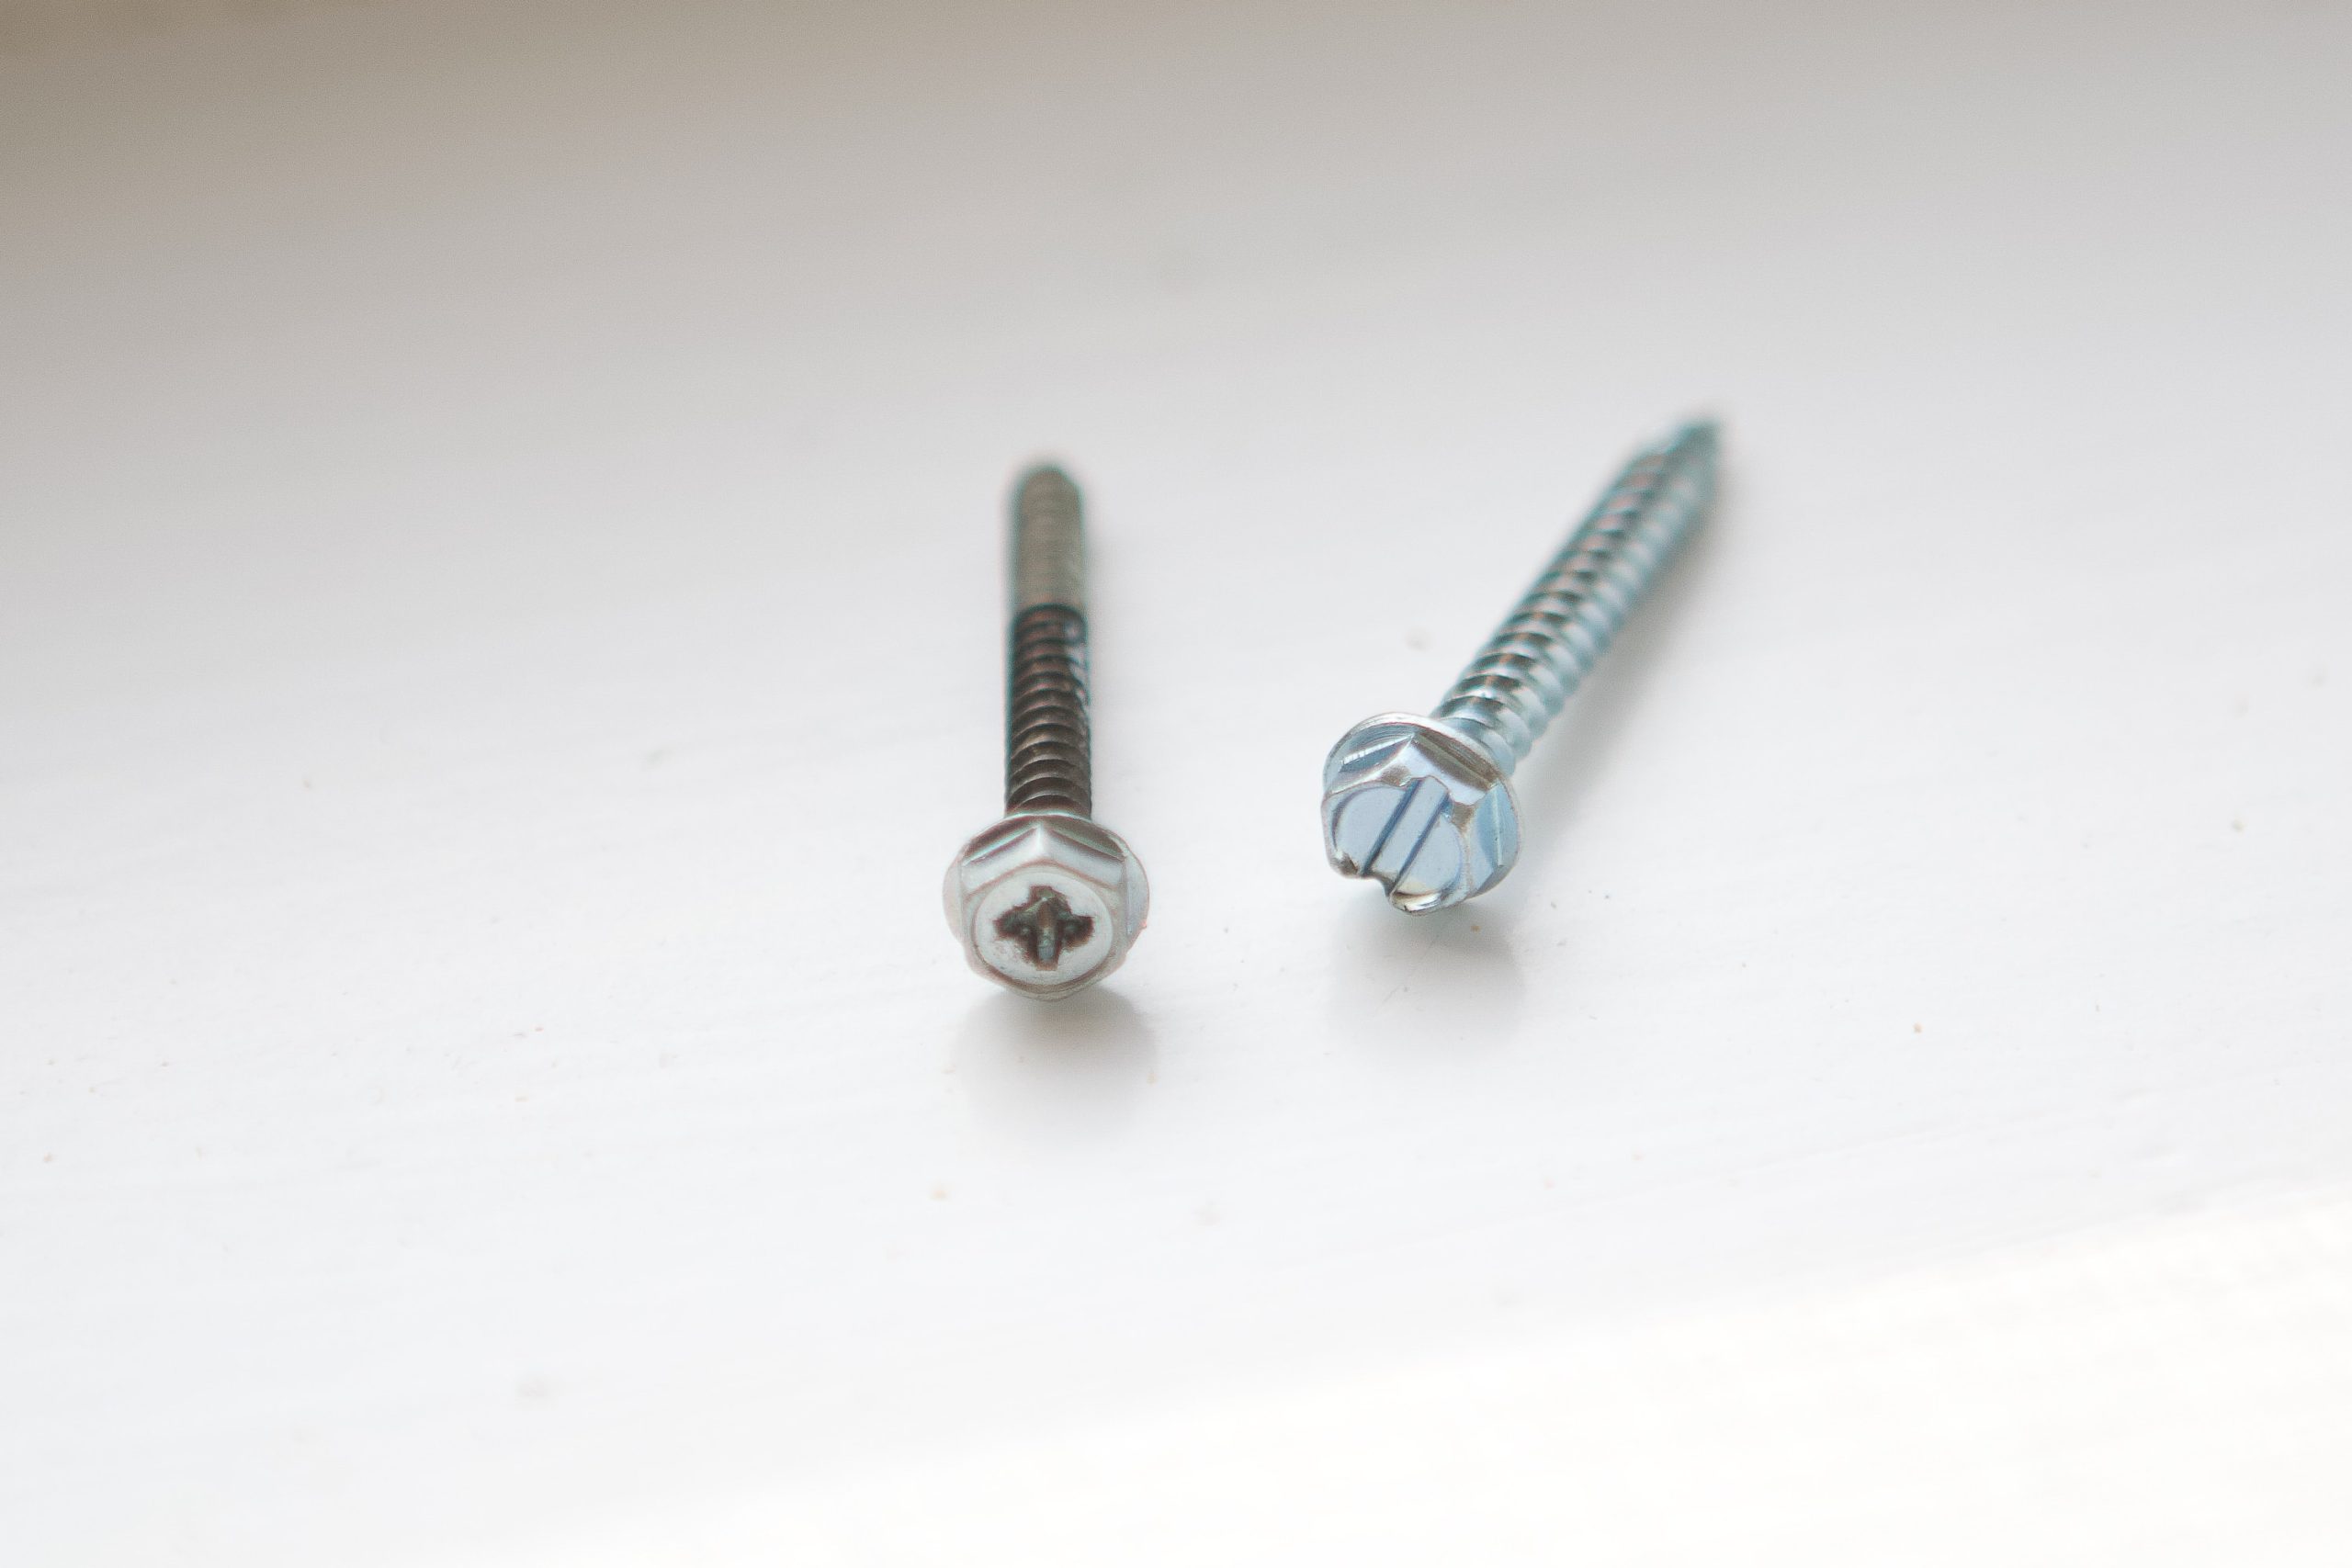 Screws that came with the woven window shades